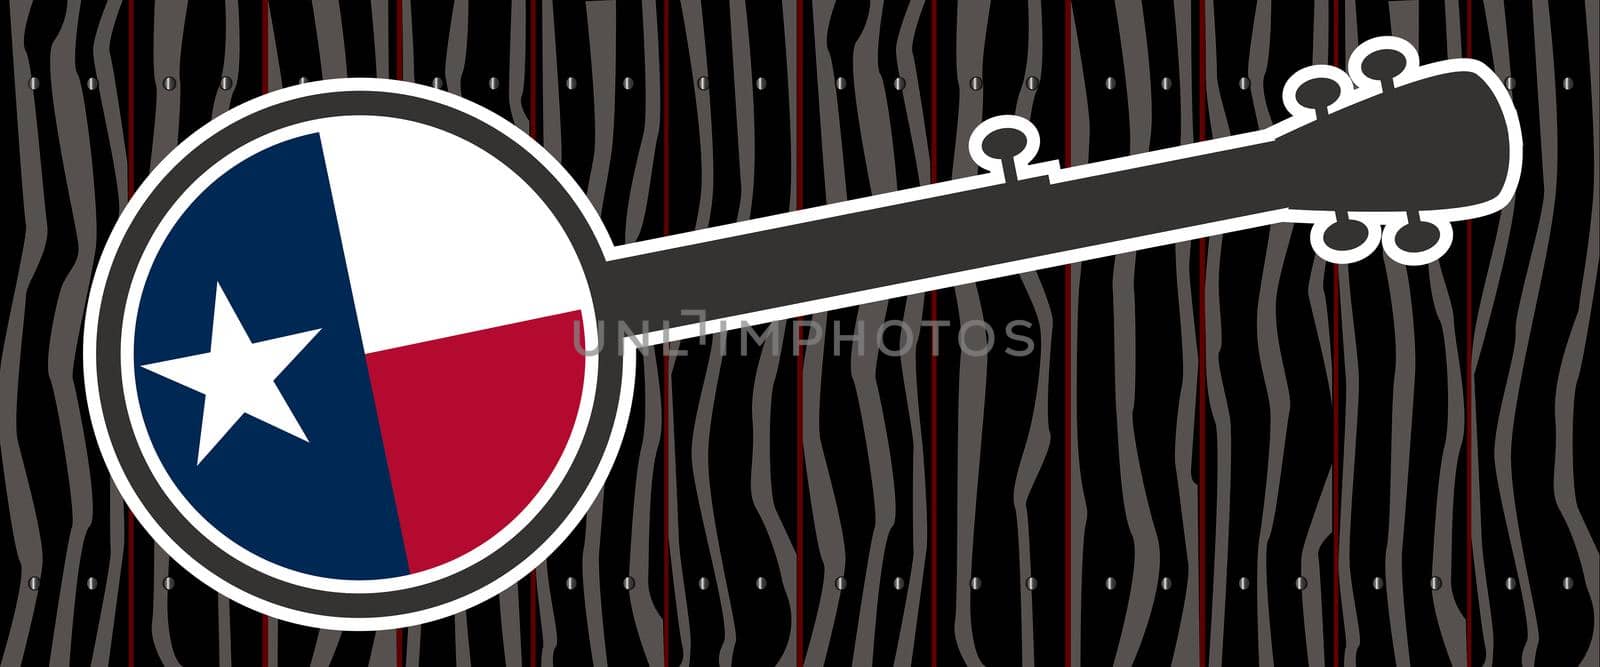 Texan flag and banjo silhouette set against a dark fence style background